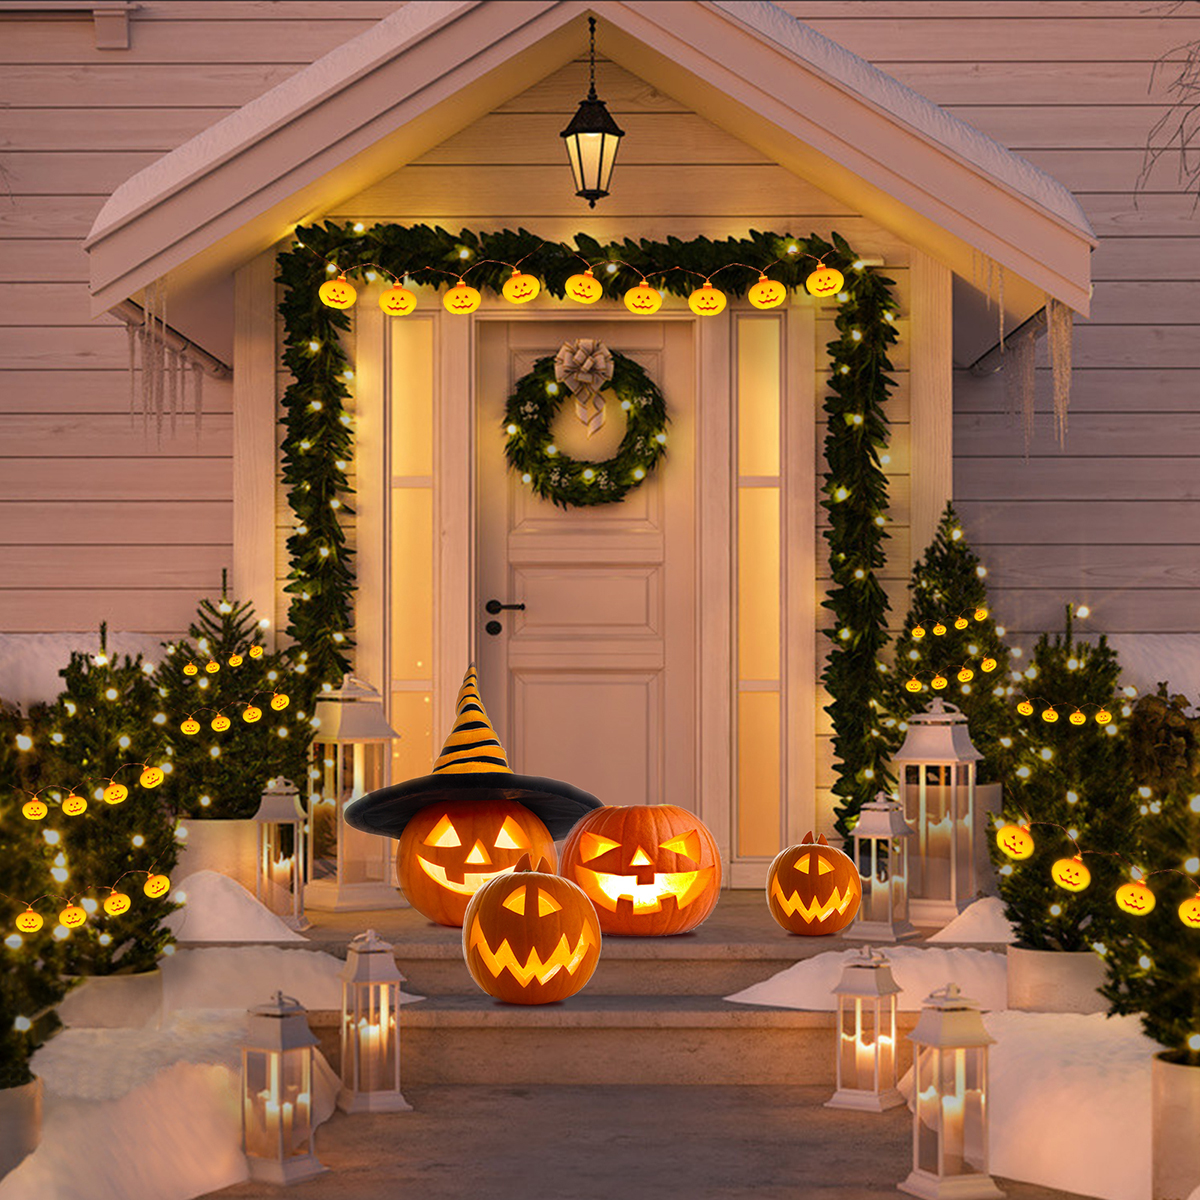 Find 9 8ft Halloween Decorations 20 LED Pumpkin String Lights Home Garden Decor Warm White for Sale on Gipsybee.com with cryptocurrencies